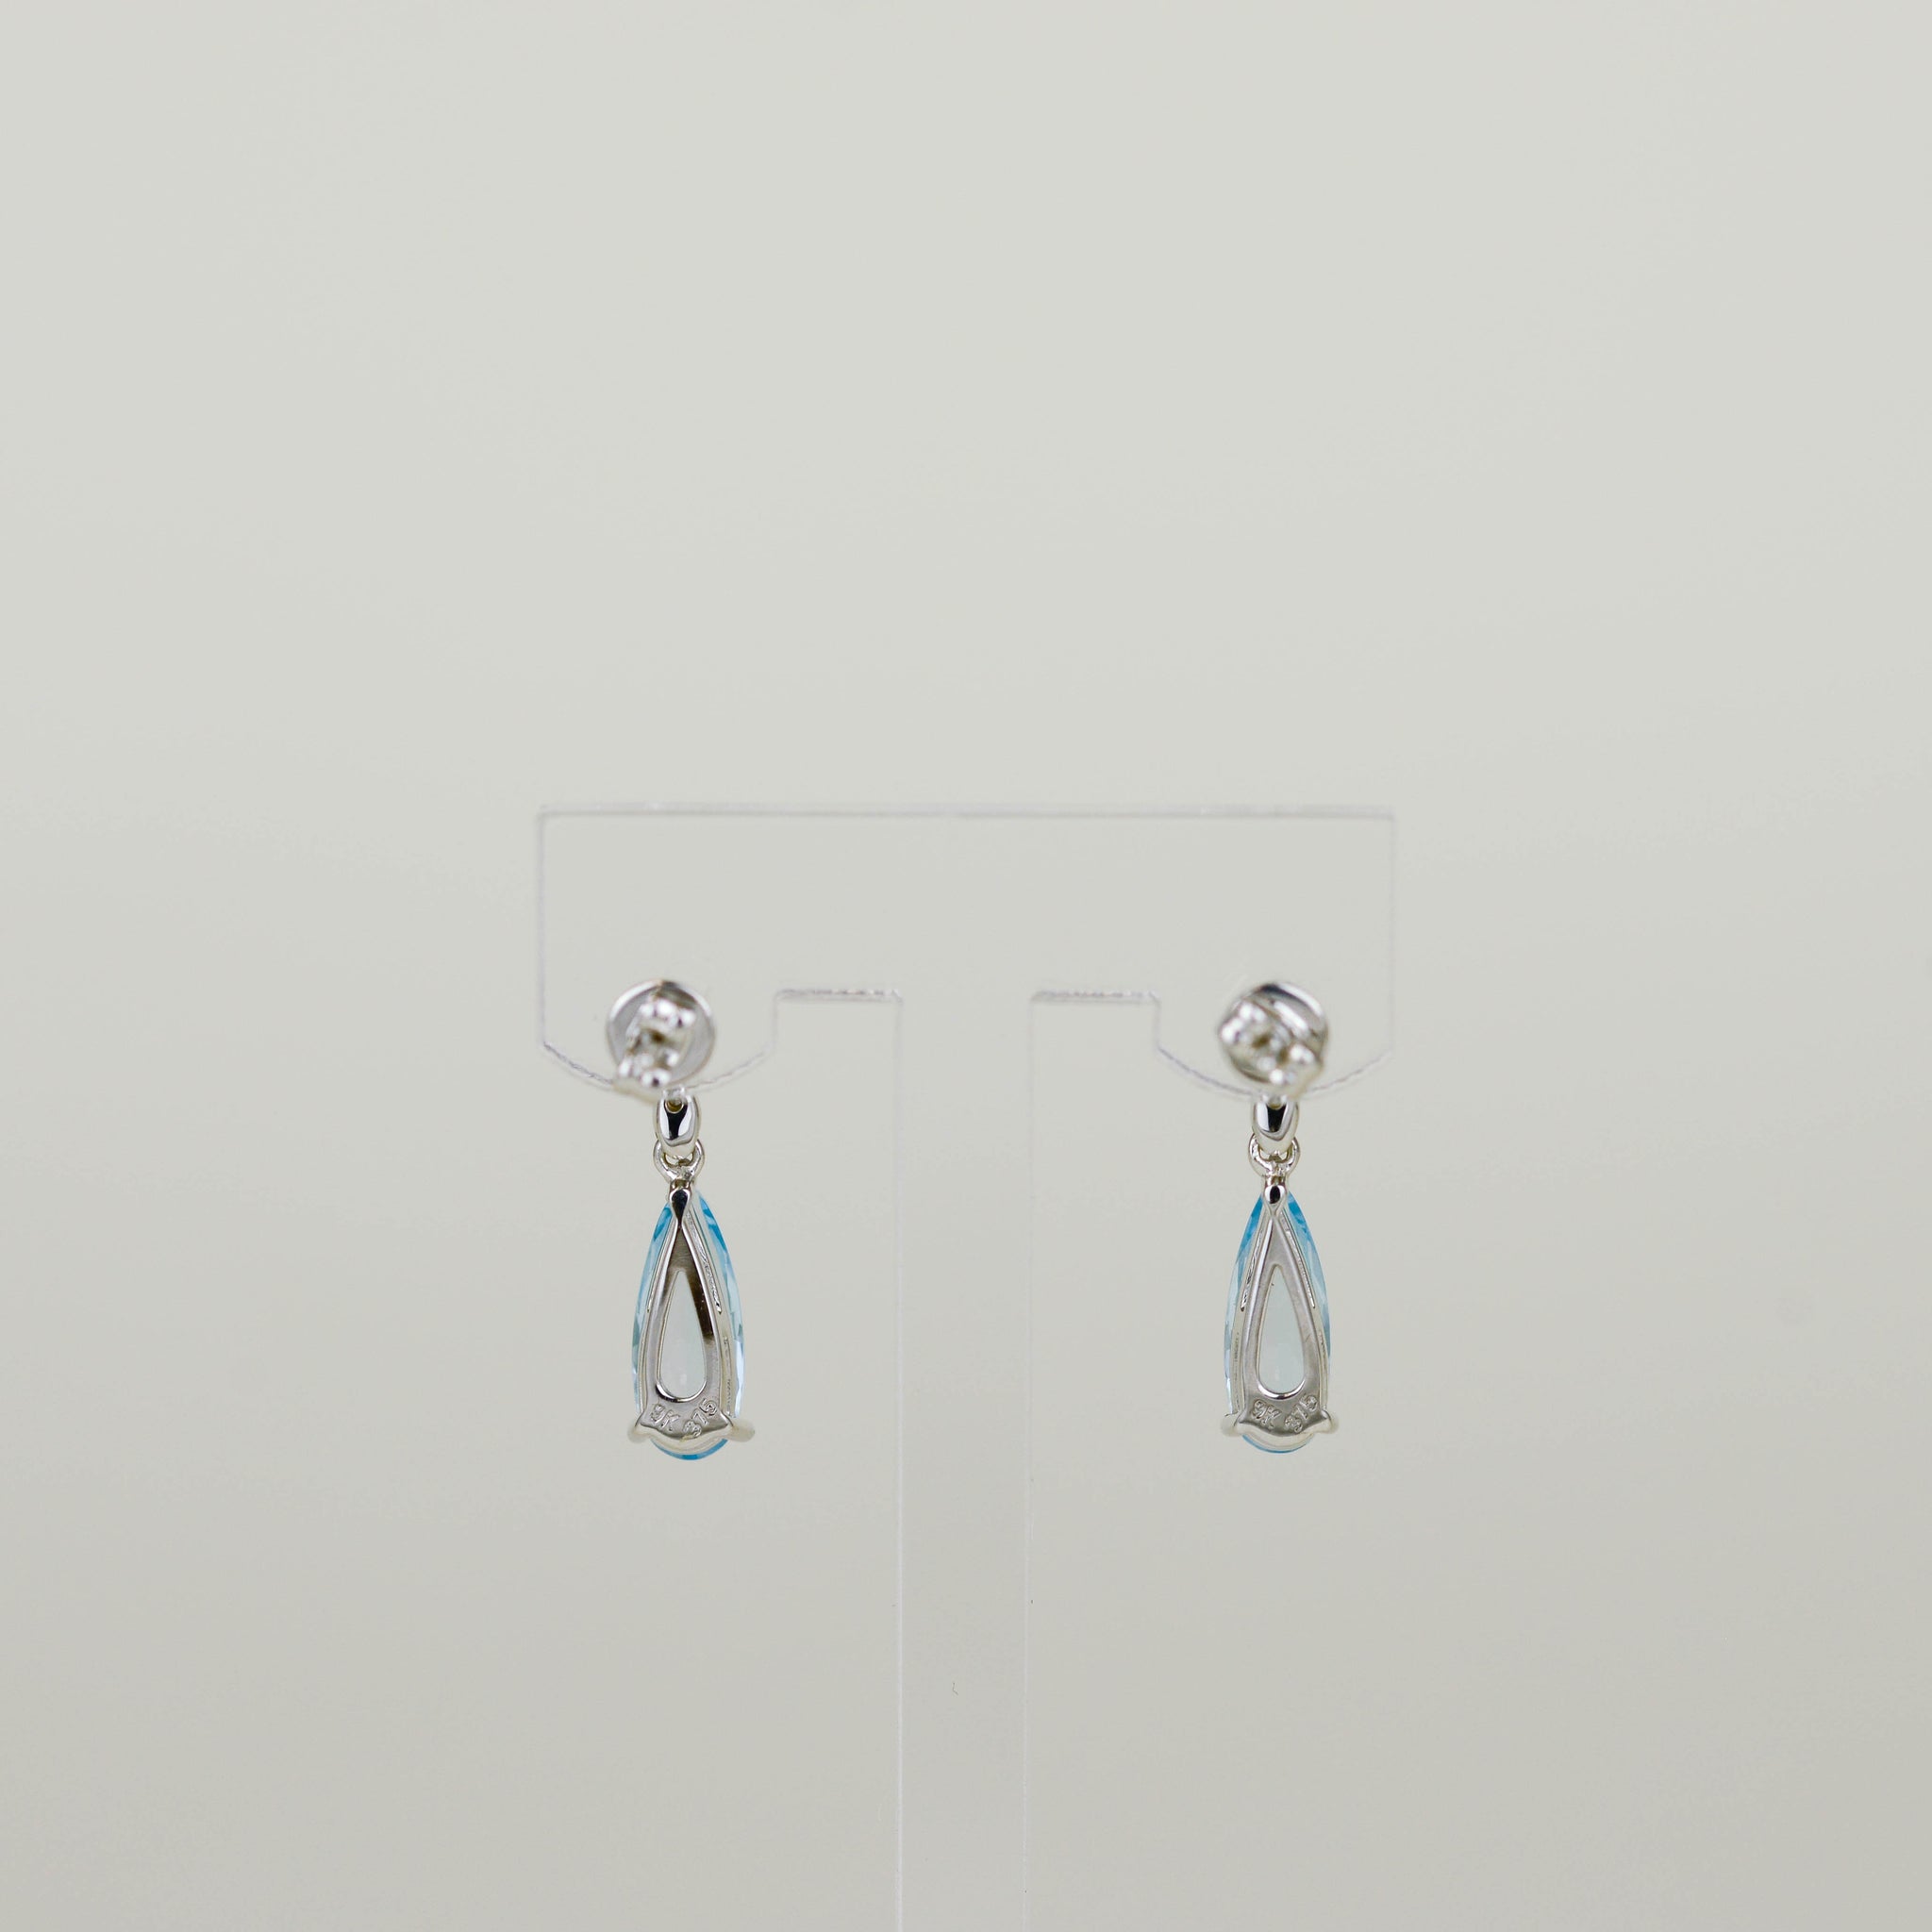 9ct White Gold 2.83ct Elongated Pear Cut Blue Topaz and Diamond Drop Earrings